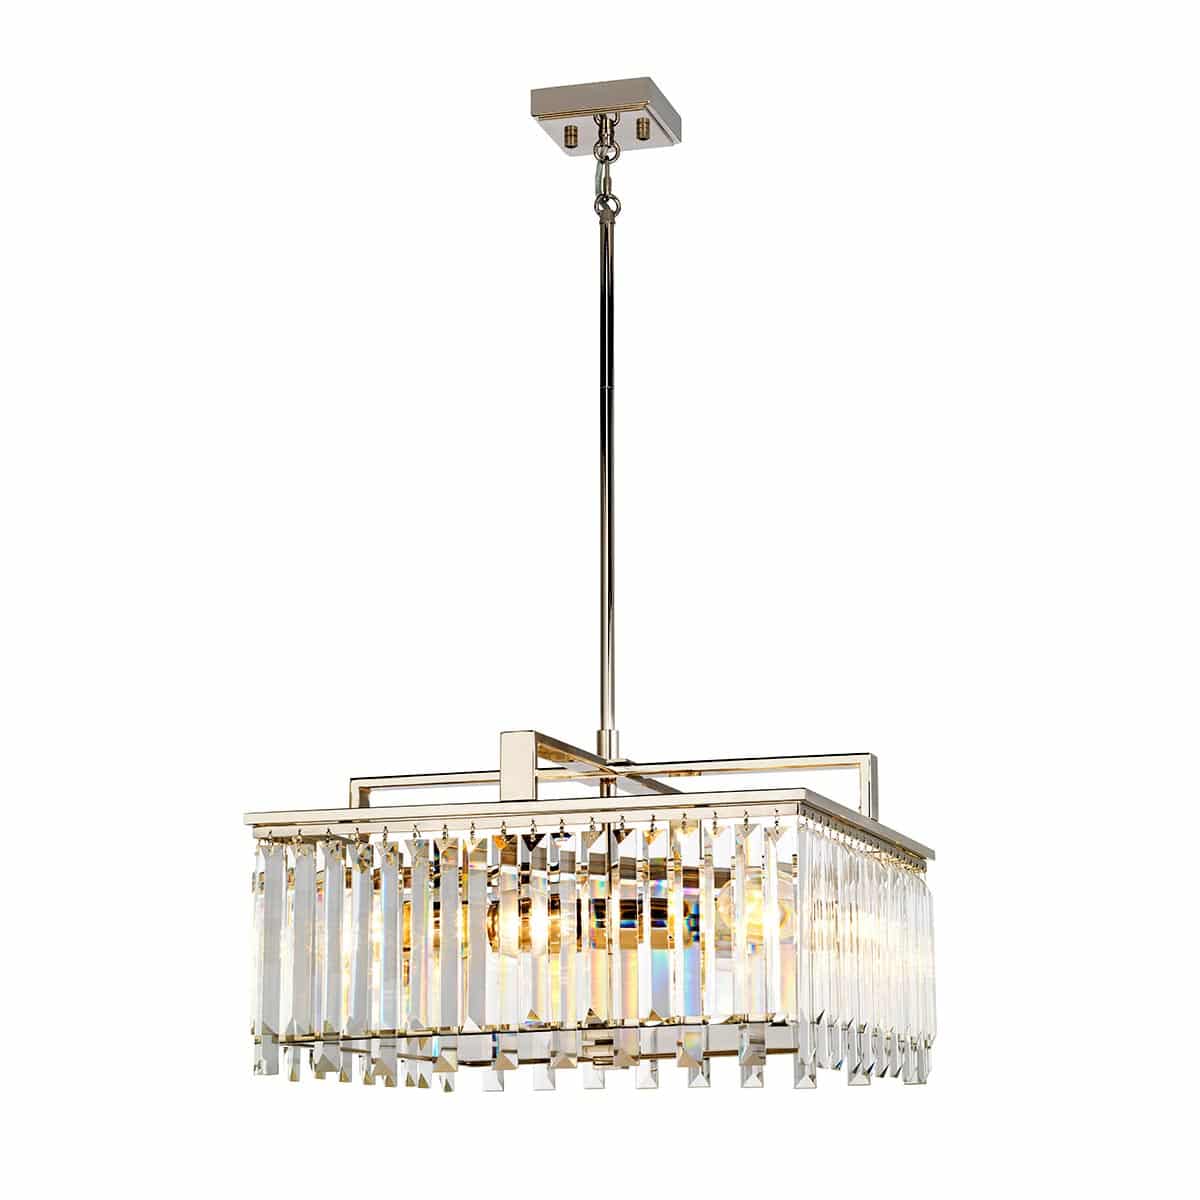 Aries Art Deco Style 4 Light Dual Mount Crystal Chandelier Polished Nickel